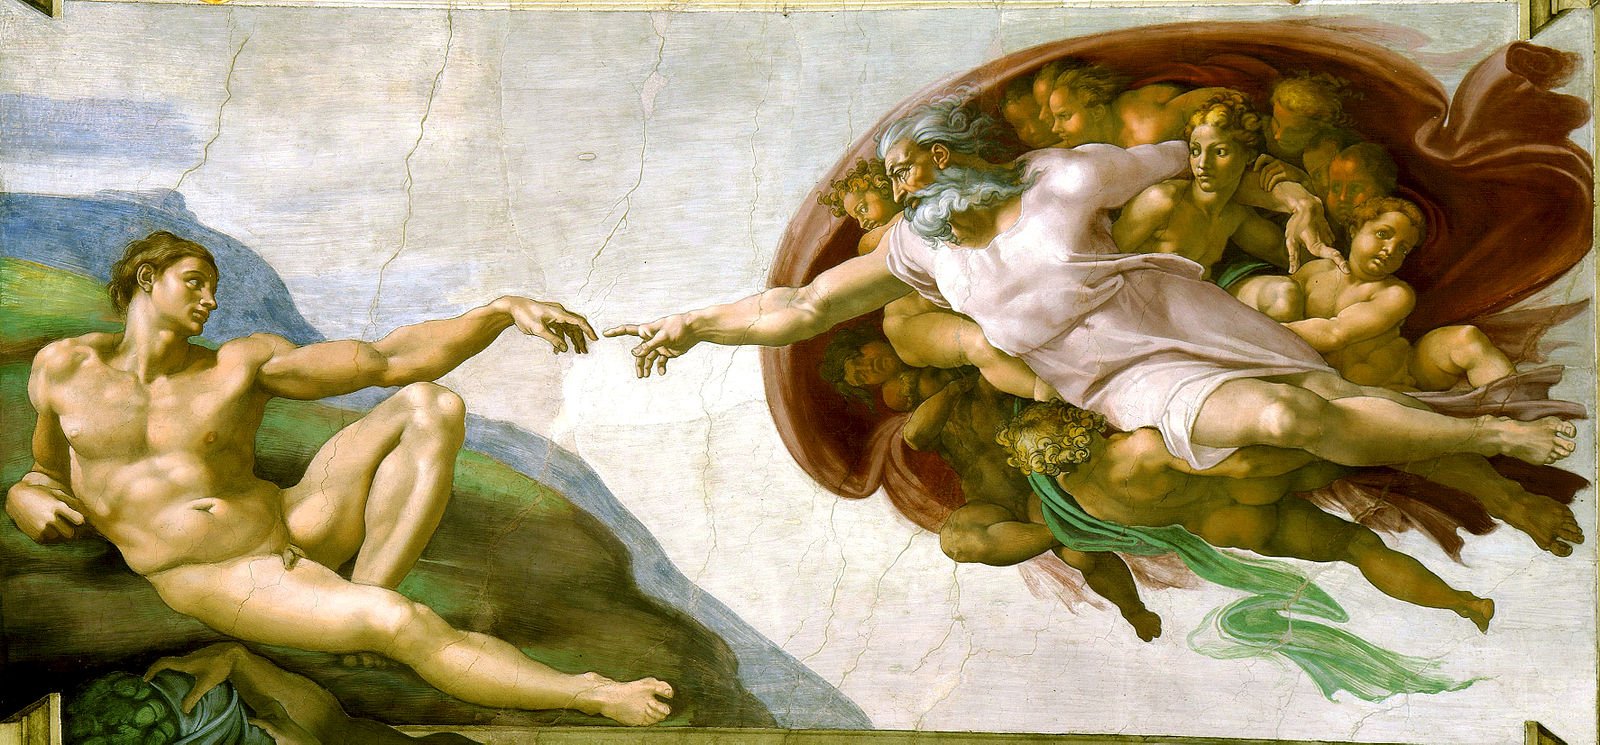 The Creation of Adam by Michelangelo. c. 1511.